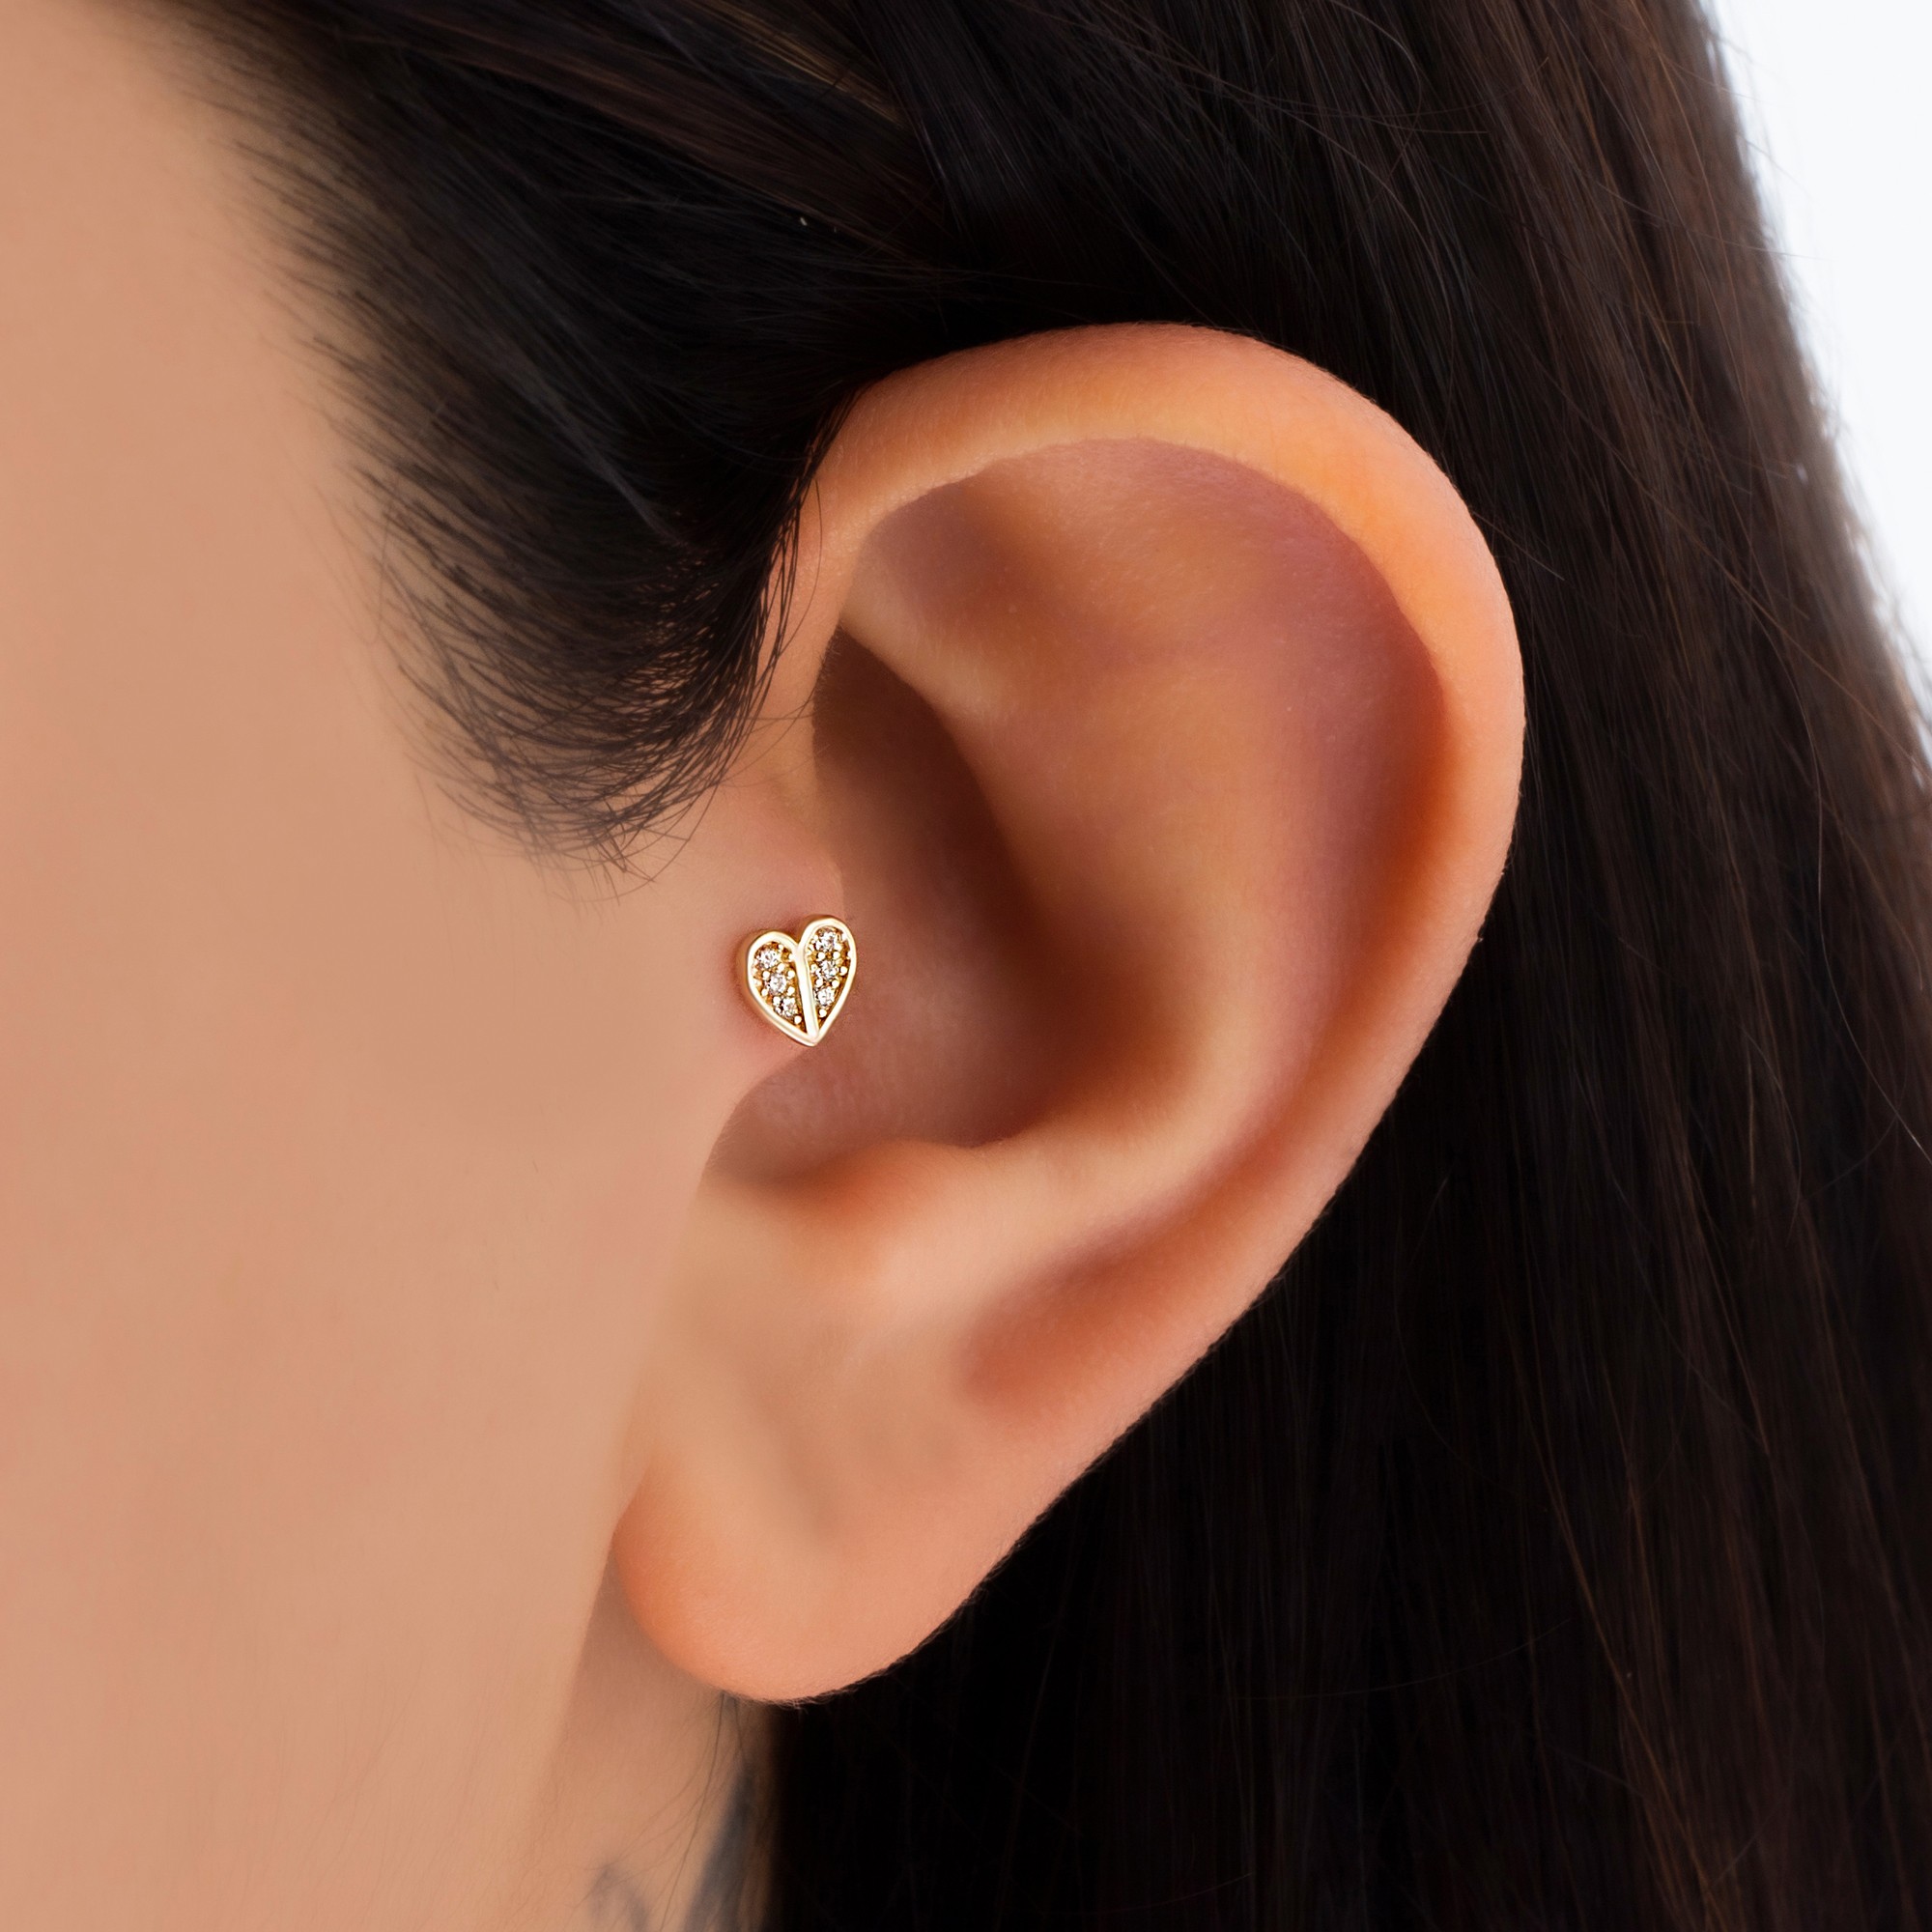 Elegant Heart Piercing with 14 Carat Gold Stone